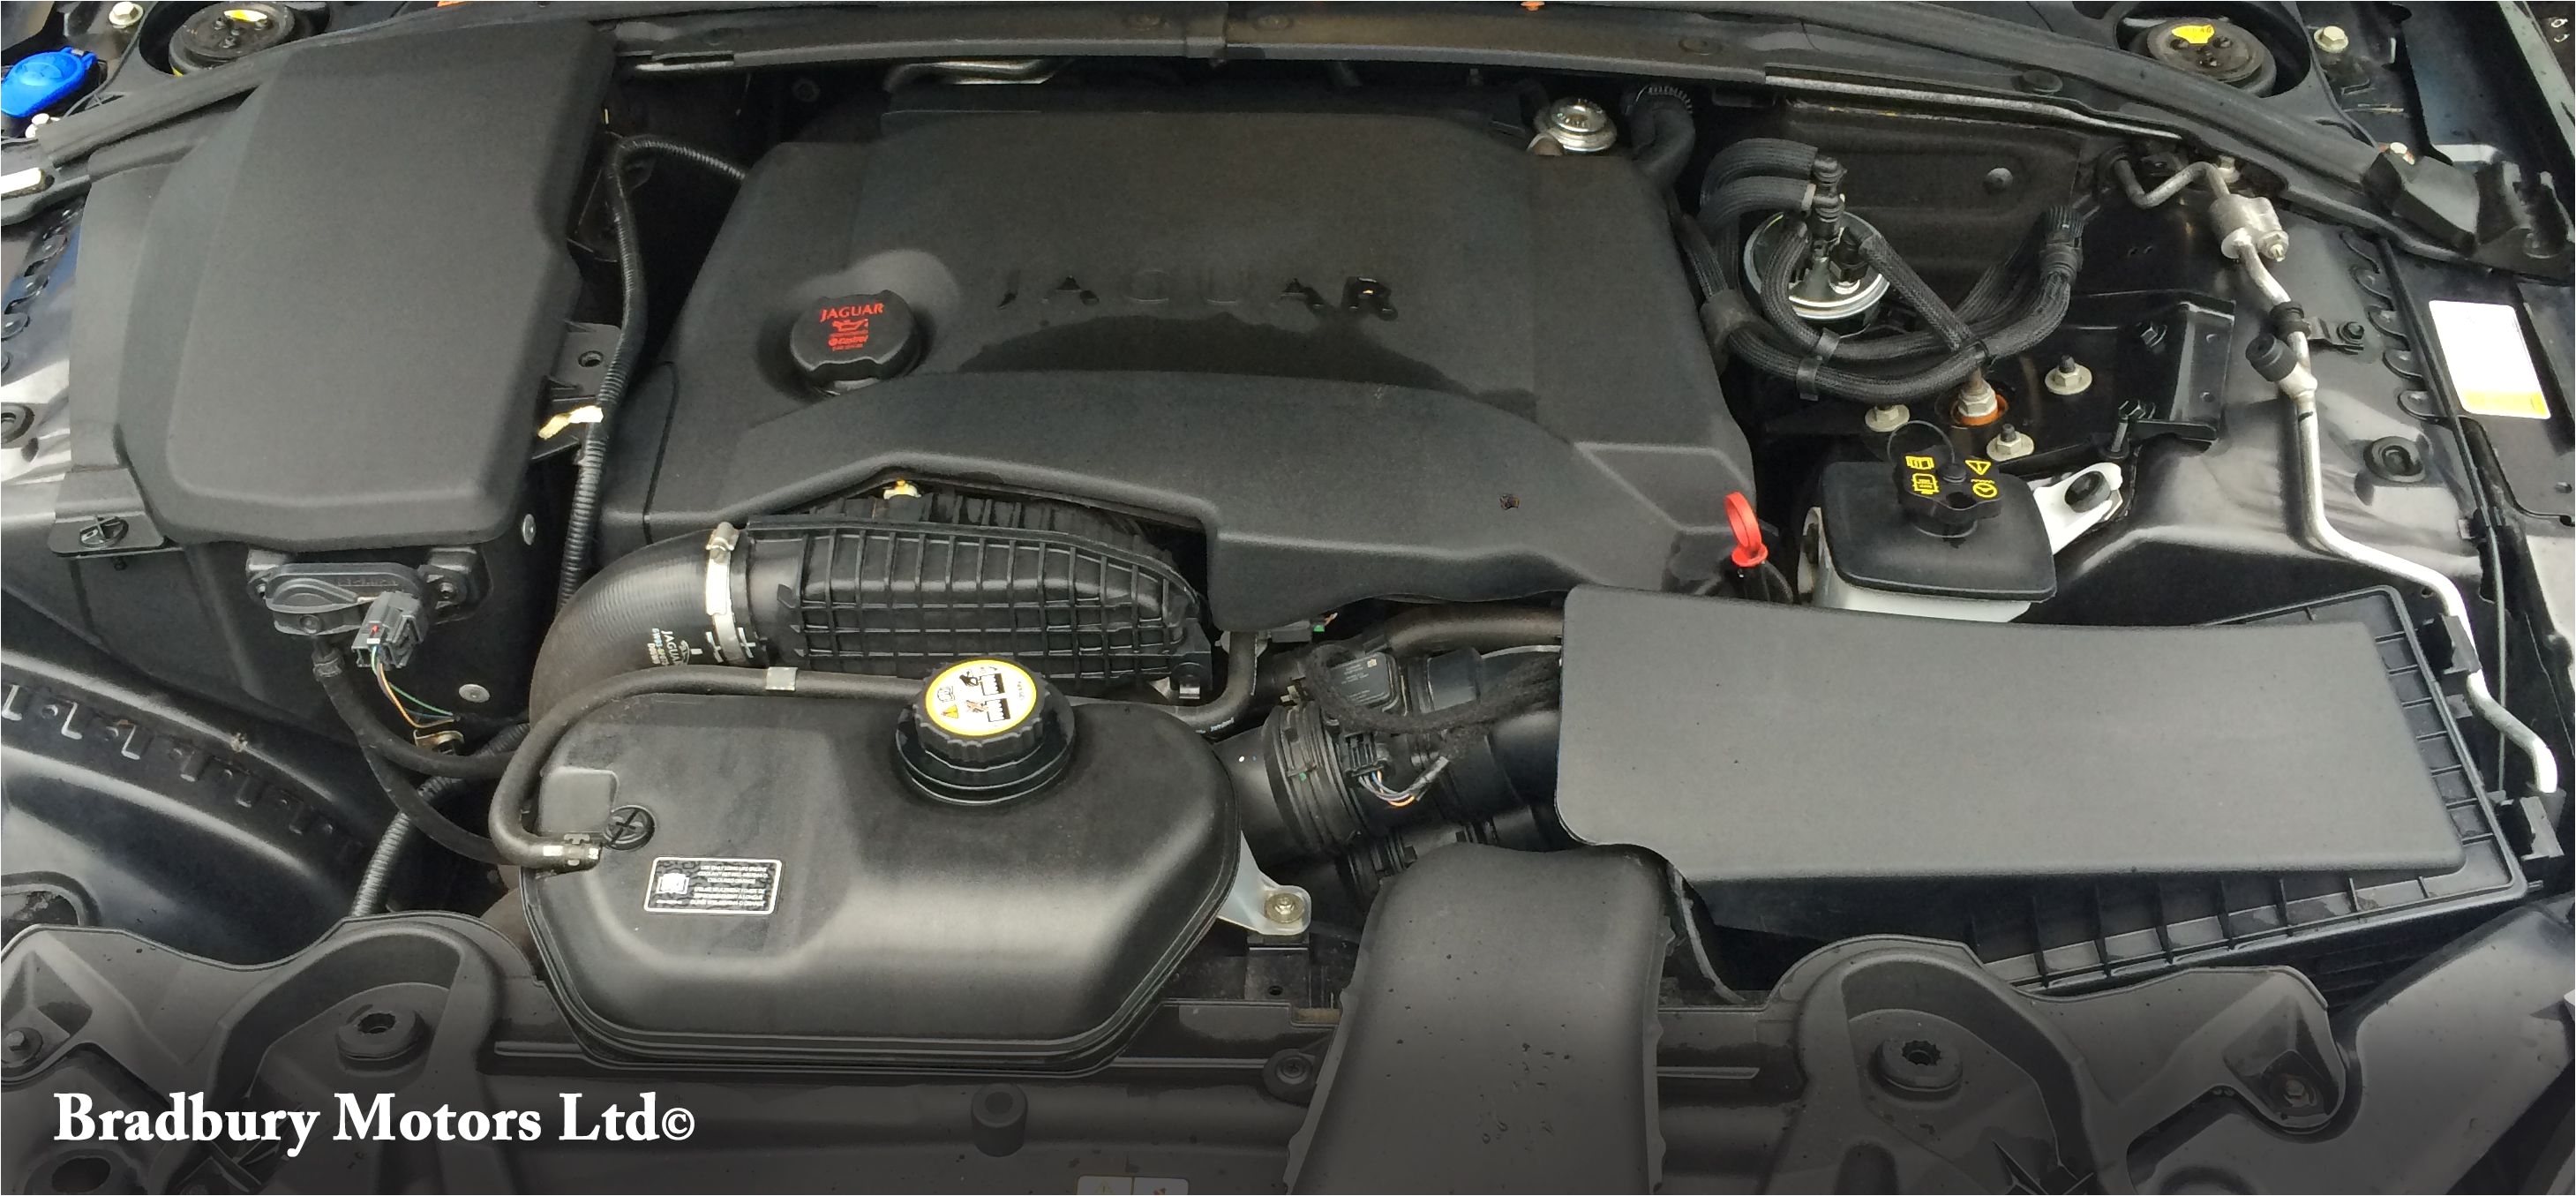 engine bay steam clean as part of the bosch car service gold servicing option